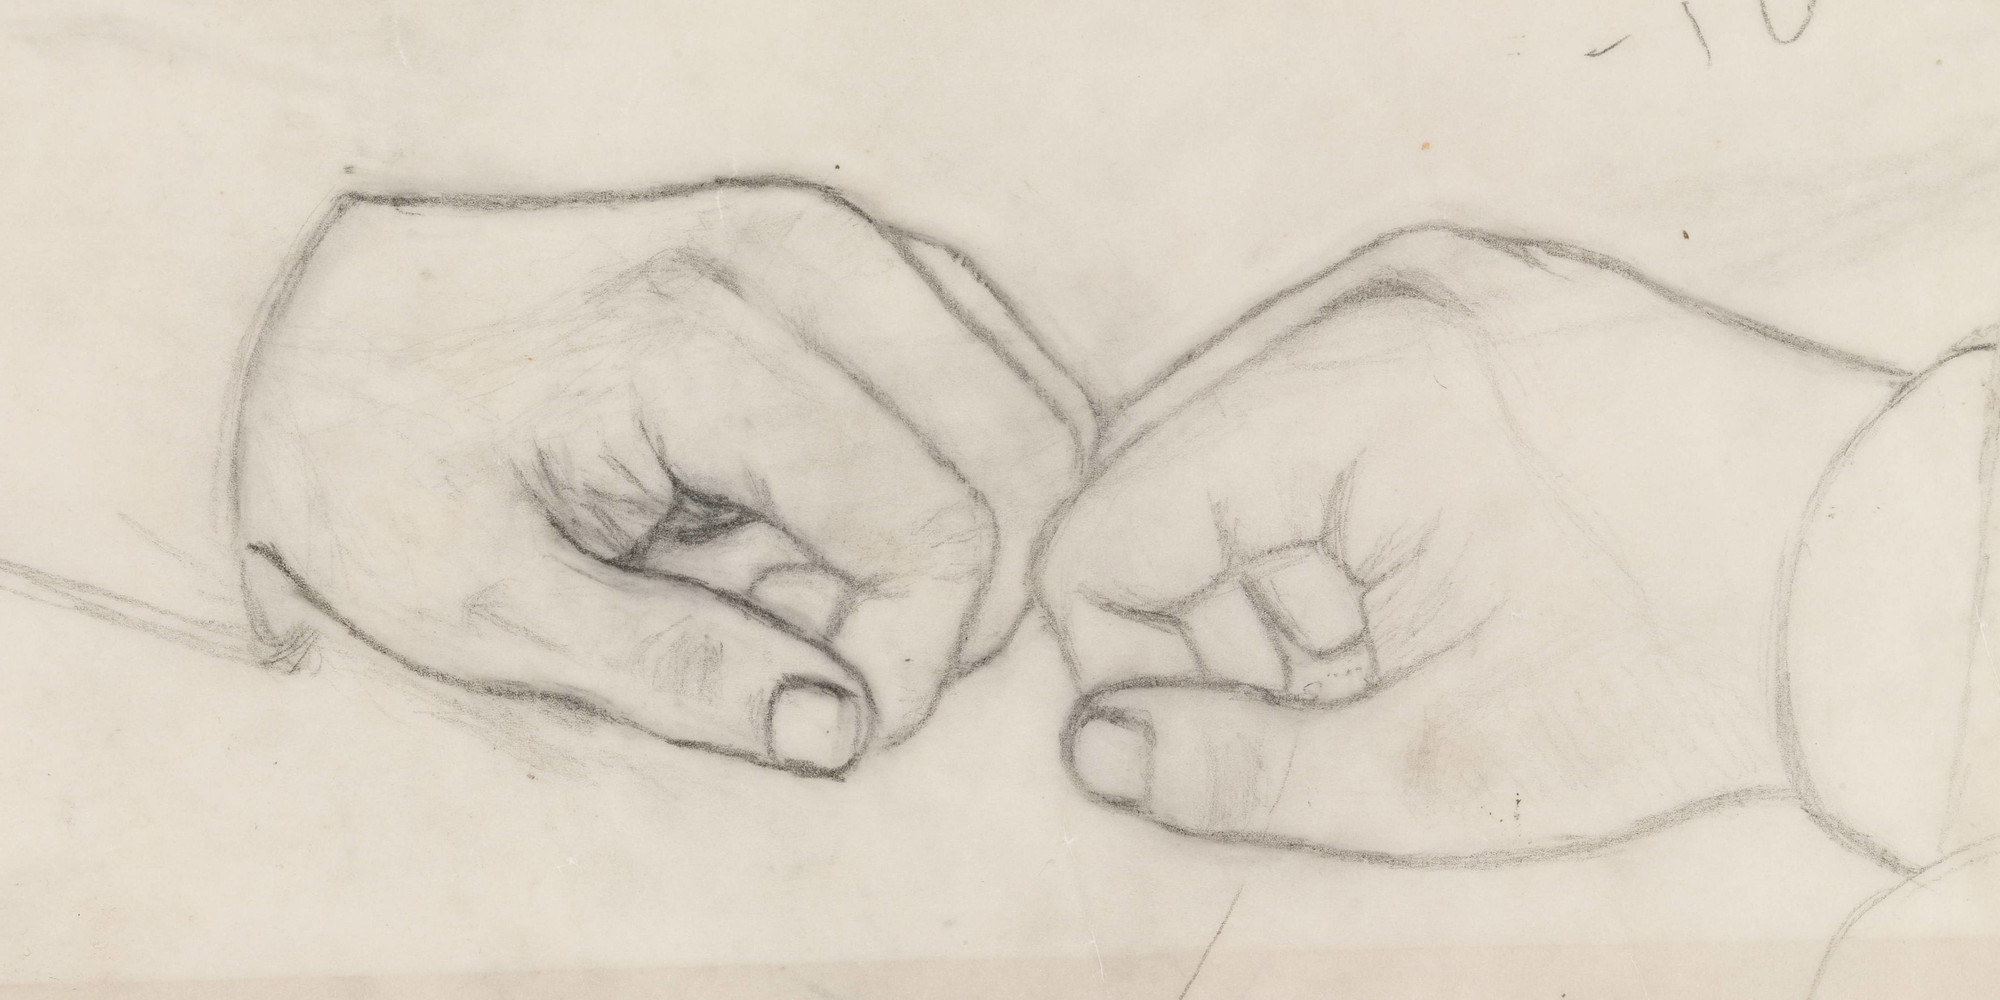 Francis Alÿs. Untitled. 1999–2001. Graphite and tape on vellum, sheet: 9 1/8 × 15 1/4&#34; (23.2 × 38.7 cm). Gift of The Speyer Family Foundation, Kathy and Richard S. Fuld, Jr., Marie-Josée and Henry R. Kravis, Patricia Phelps de Cisneros, Anna Marie and Robert F. Shapiro, The Julia Stoschek Foundation, Düsseldorf, and Committee on Media Funds. © 2020 Francis Alÿs